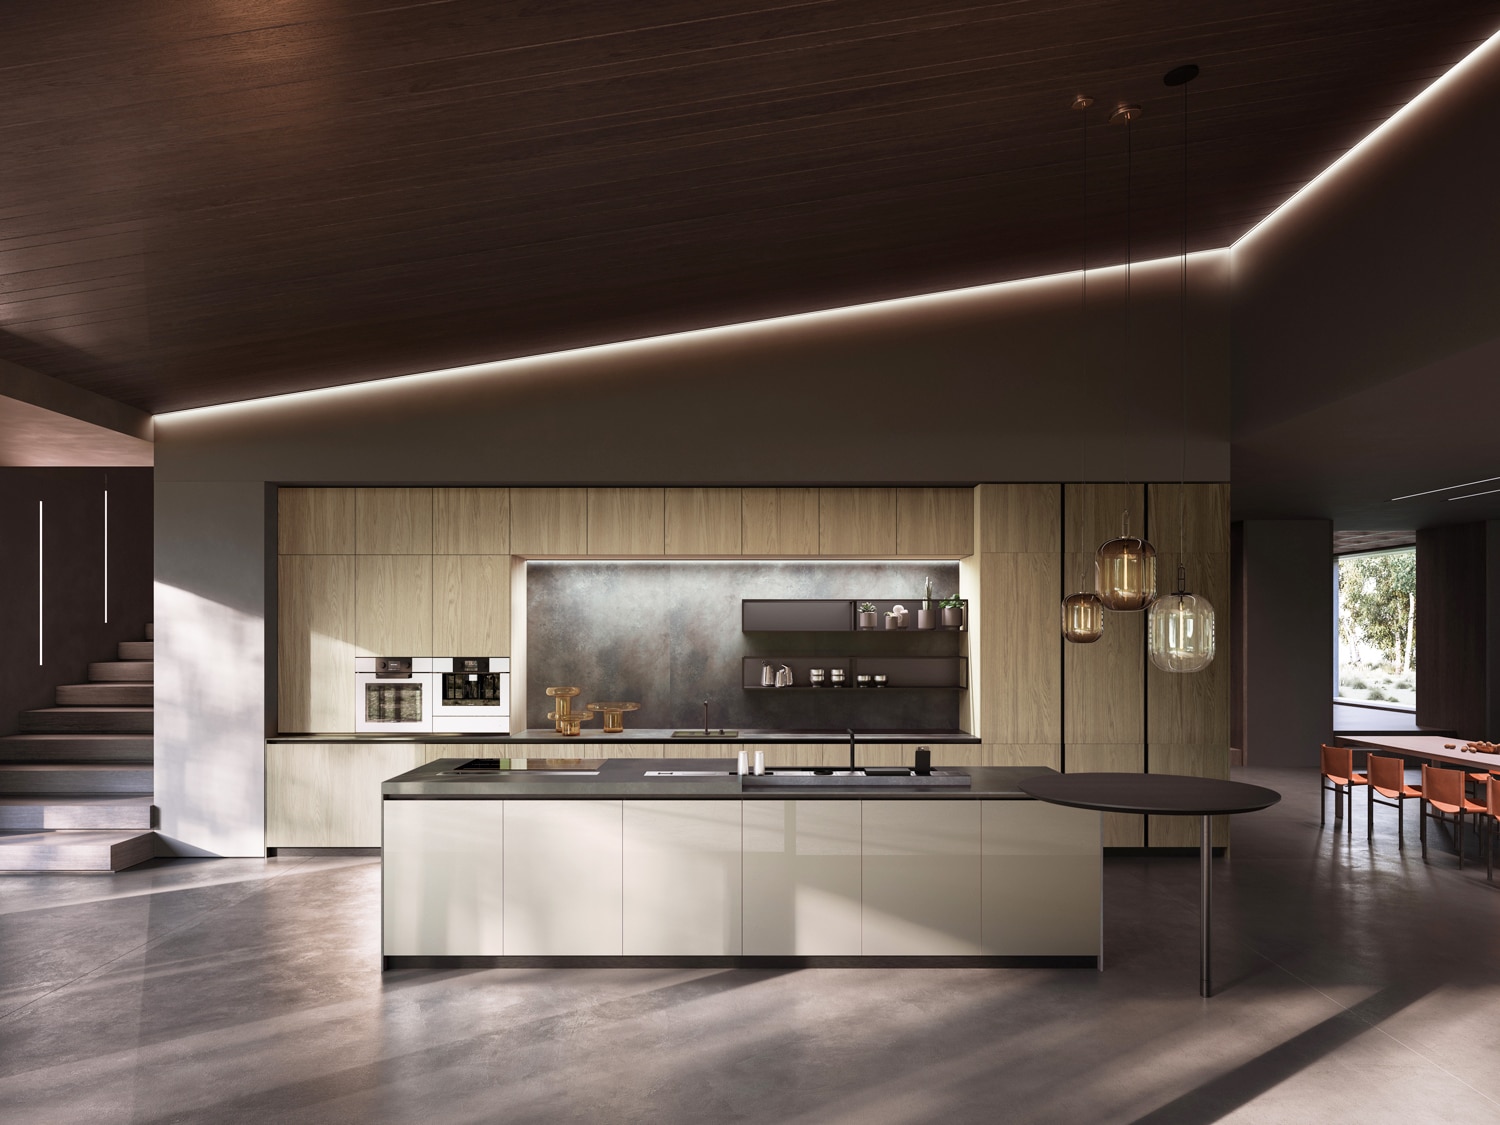 Skyline luxury kitchen design with columns, base and upper cabinets in Milano wood-effect melamine, island in Stagno metallic tempered glass, countertops and wall in Ossido Nero Laminam porcelain.